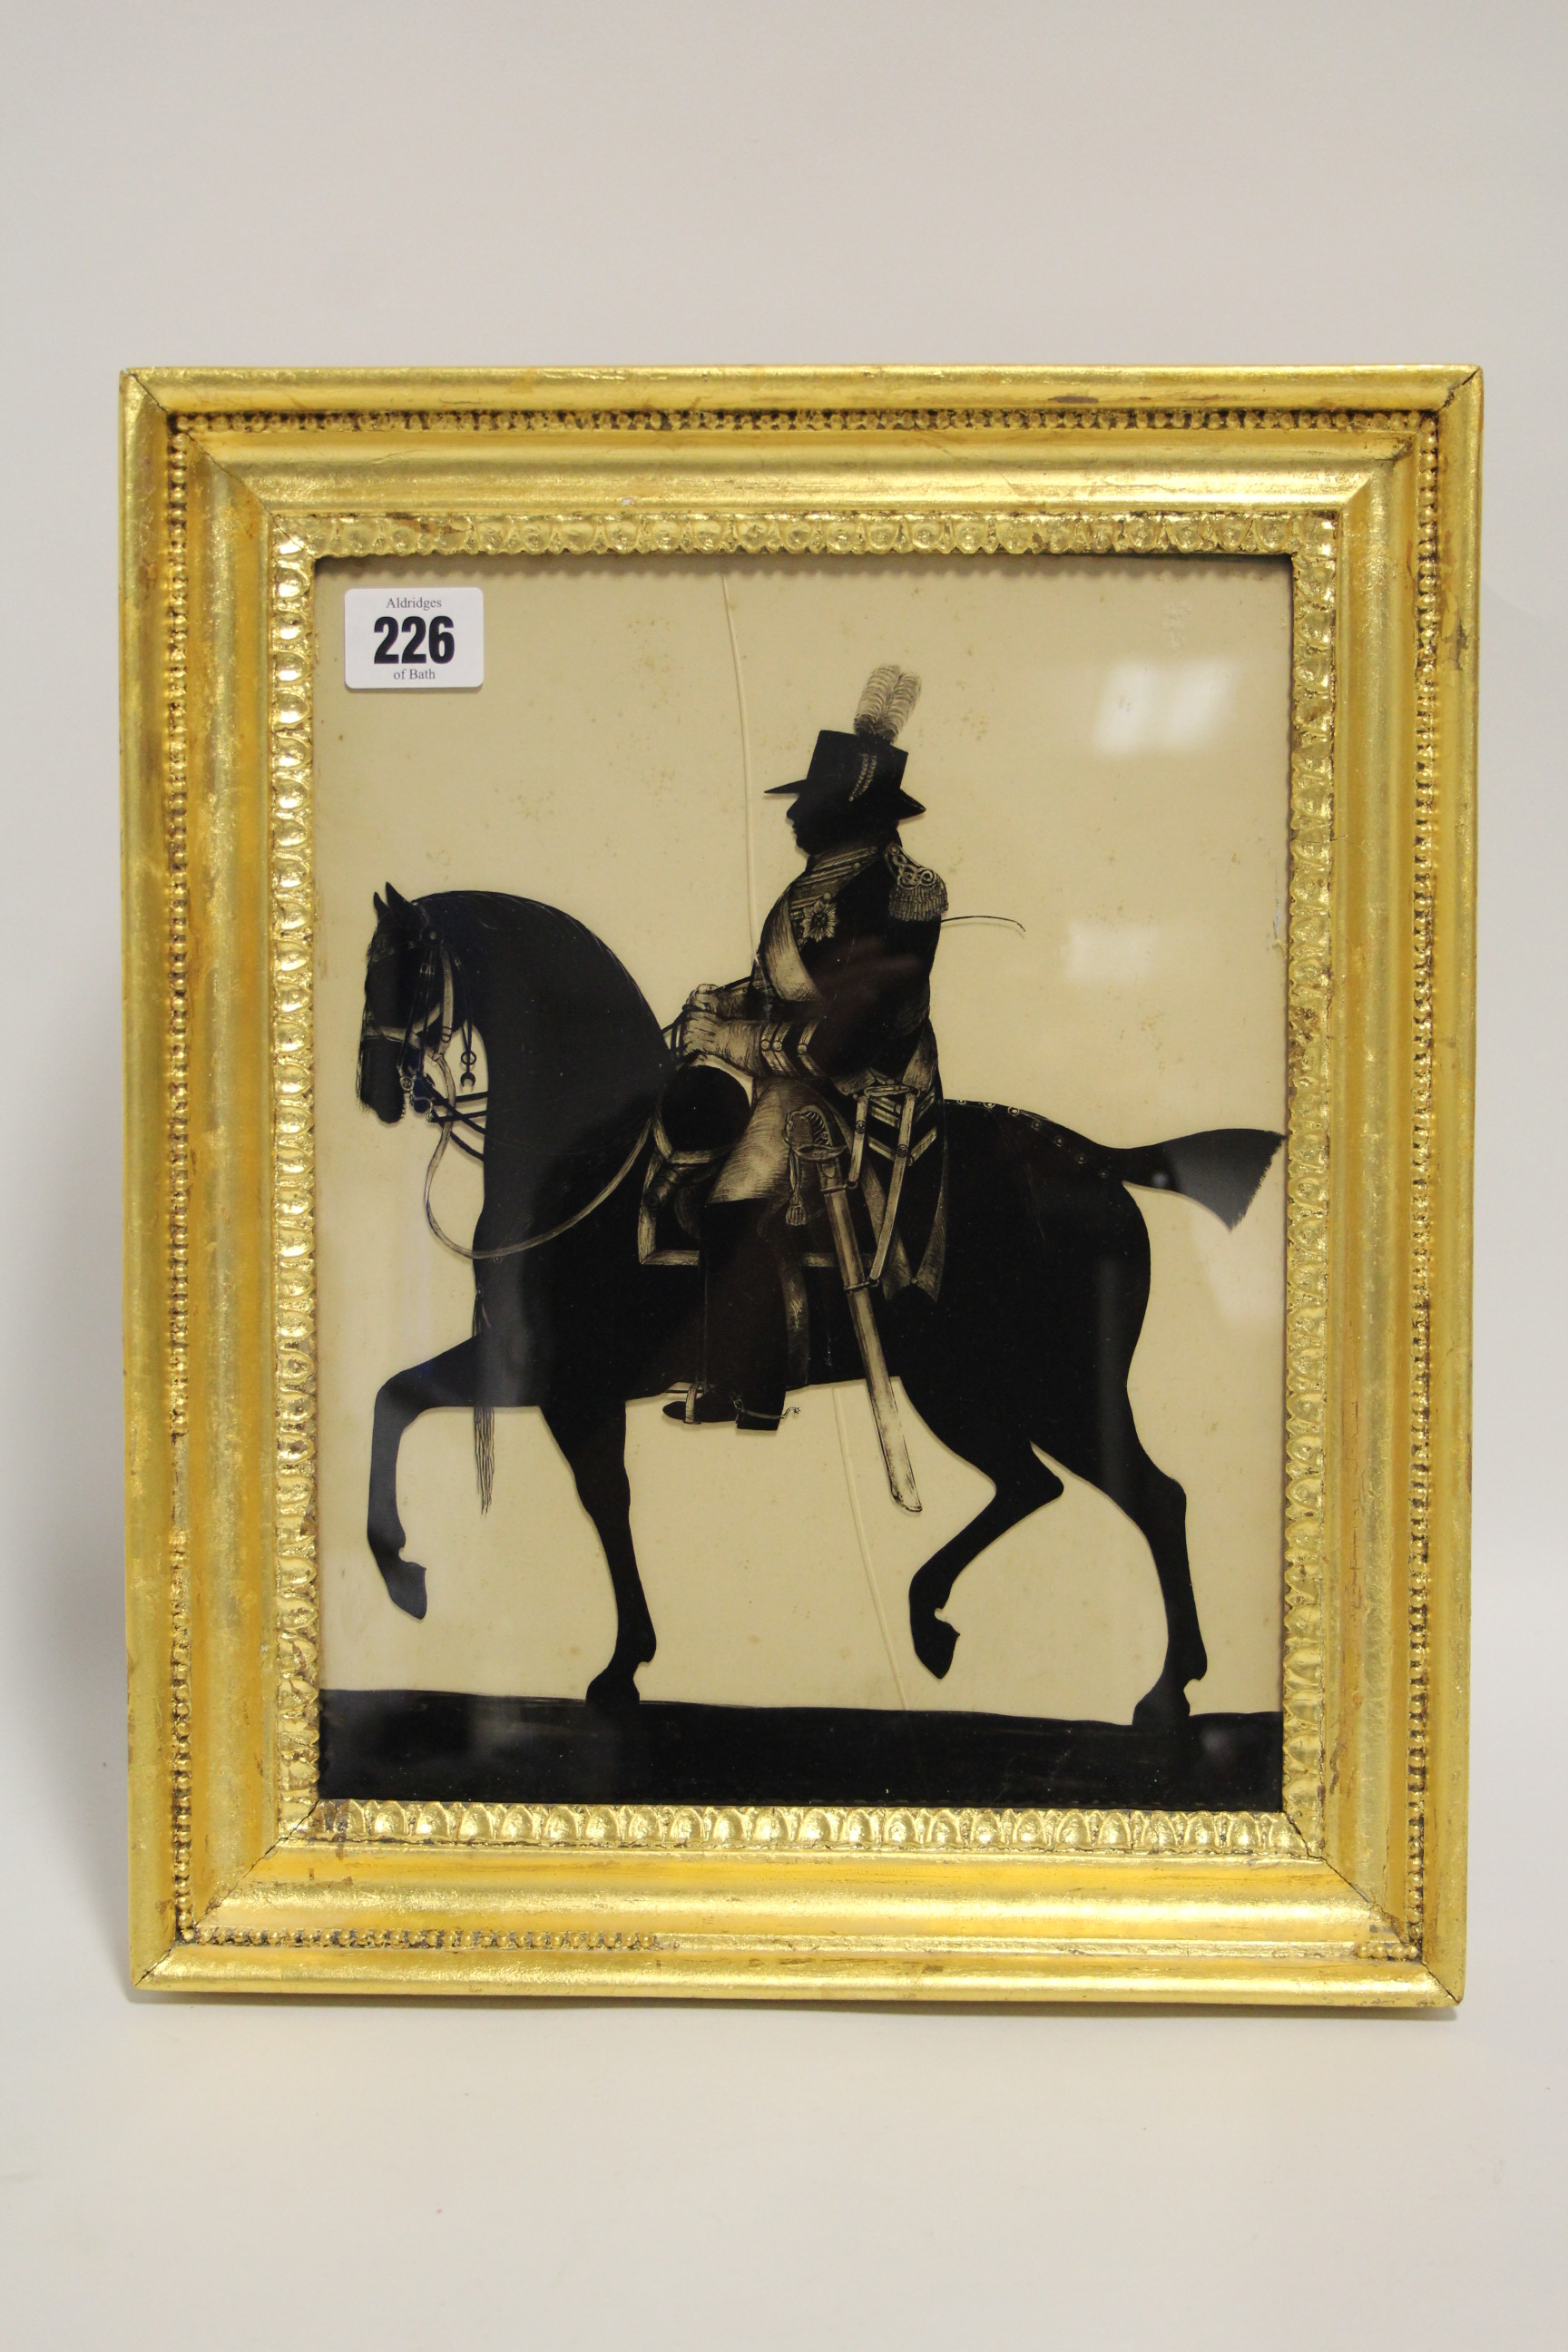 A late 18th century silhouette equestrian portrait of George III reverse-painted on glass bearing